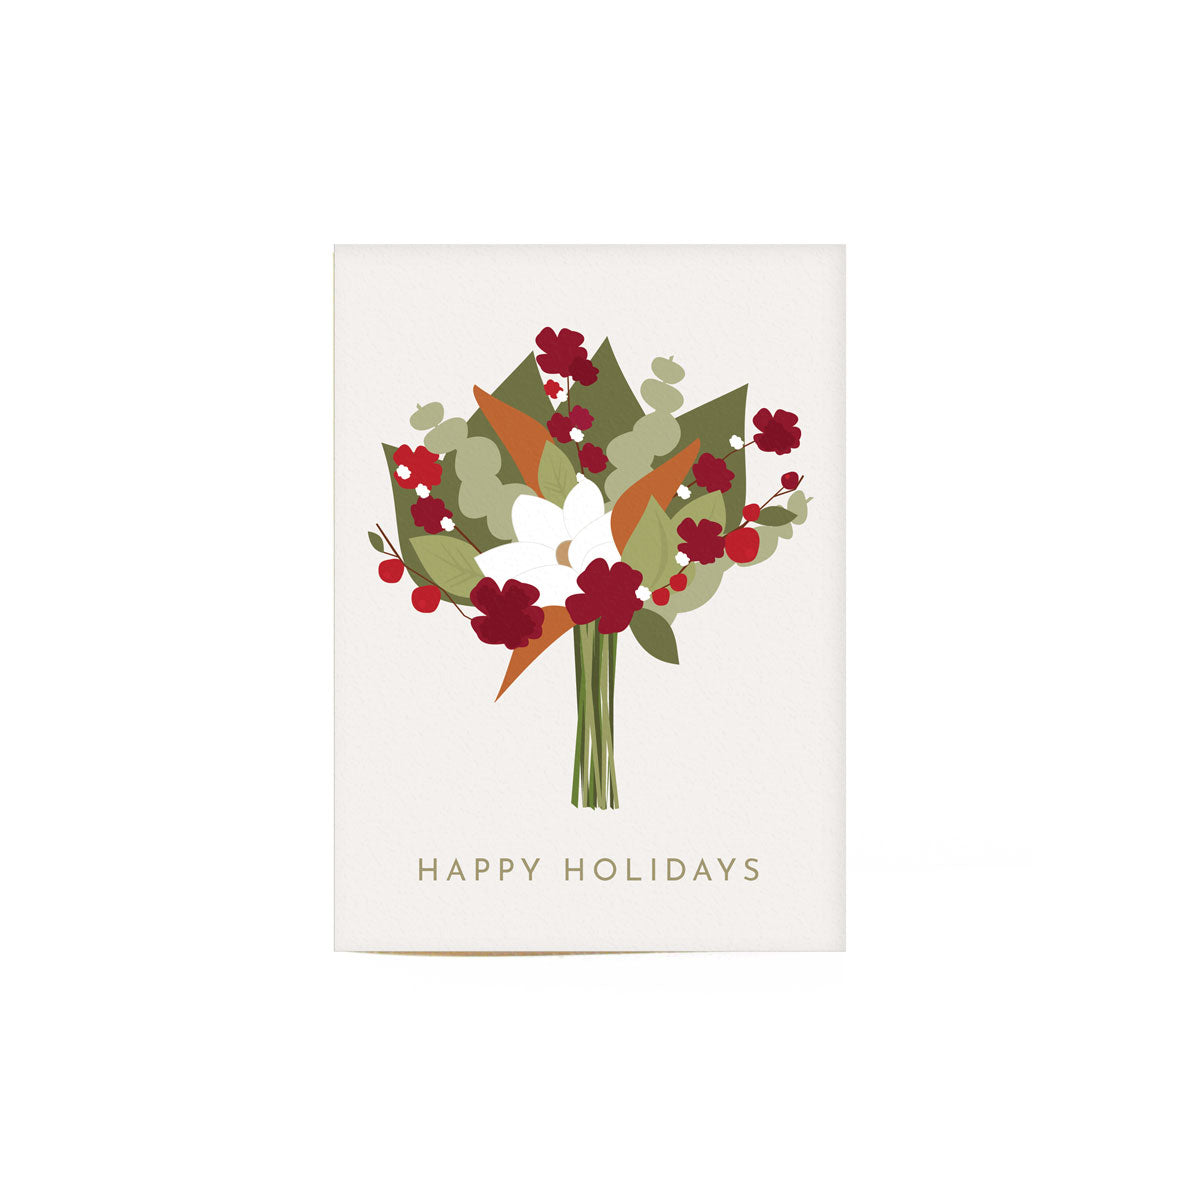 white holiday floral greeting card that reads "happy holidays" with an illustration of a bouquet of flowers that are green, red, and white.